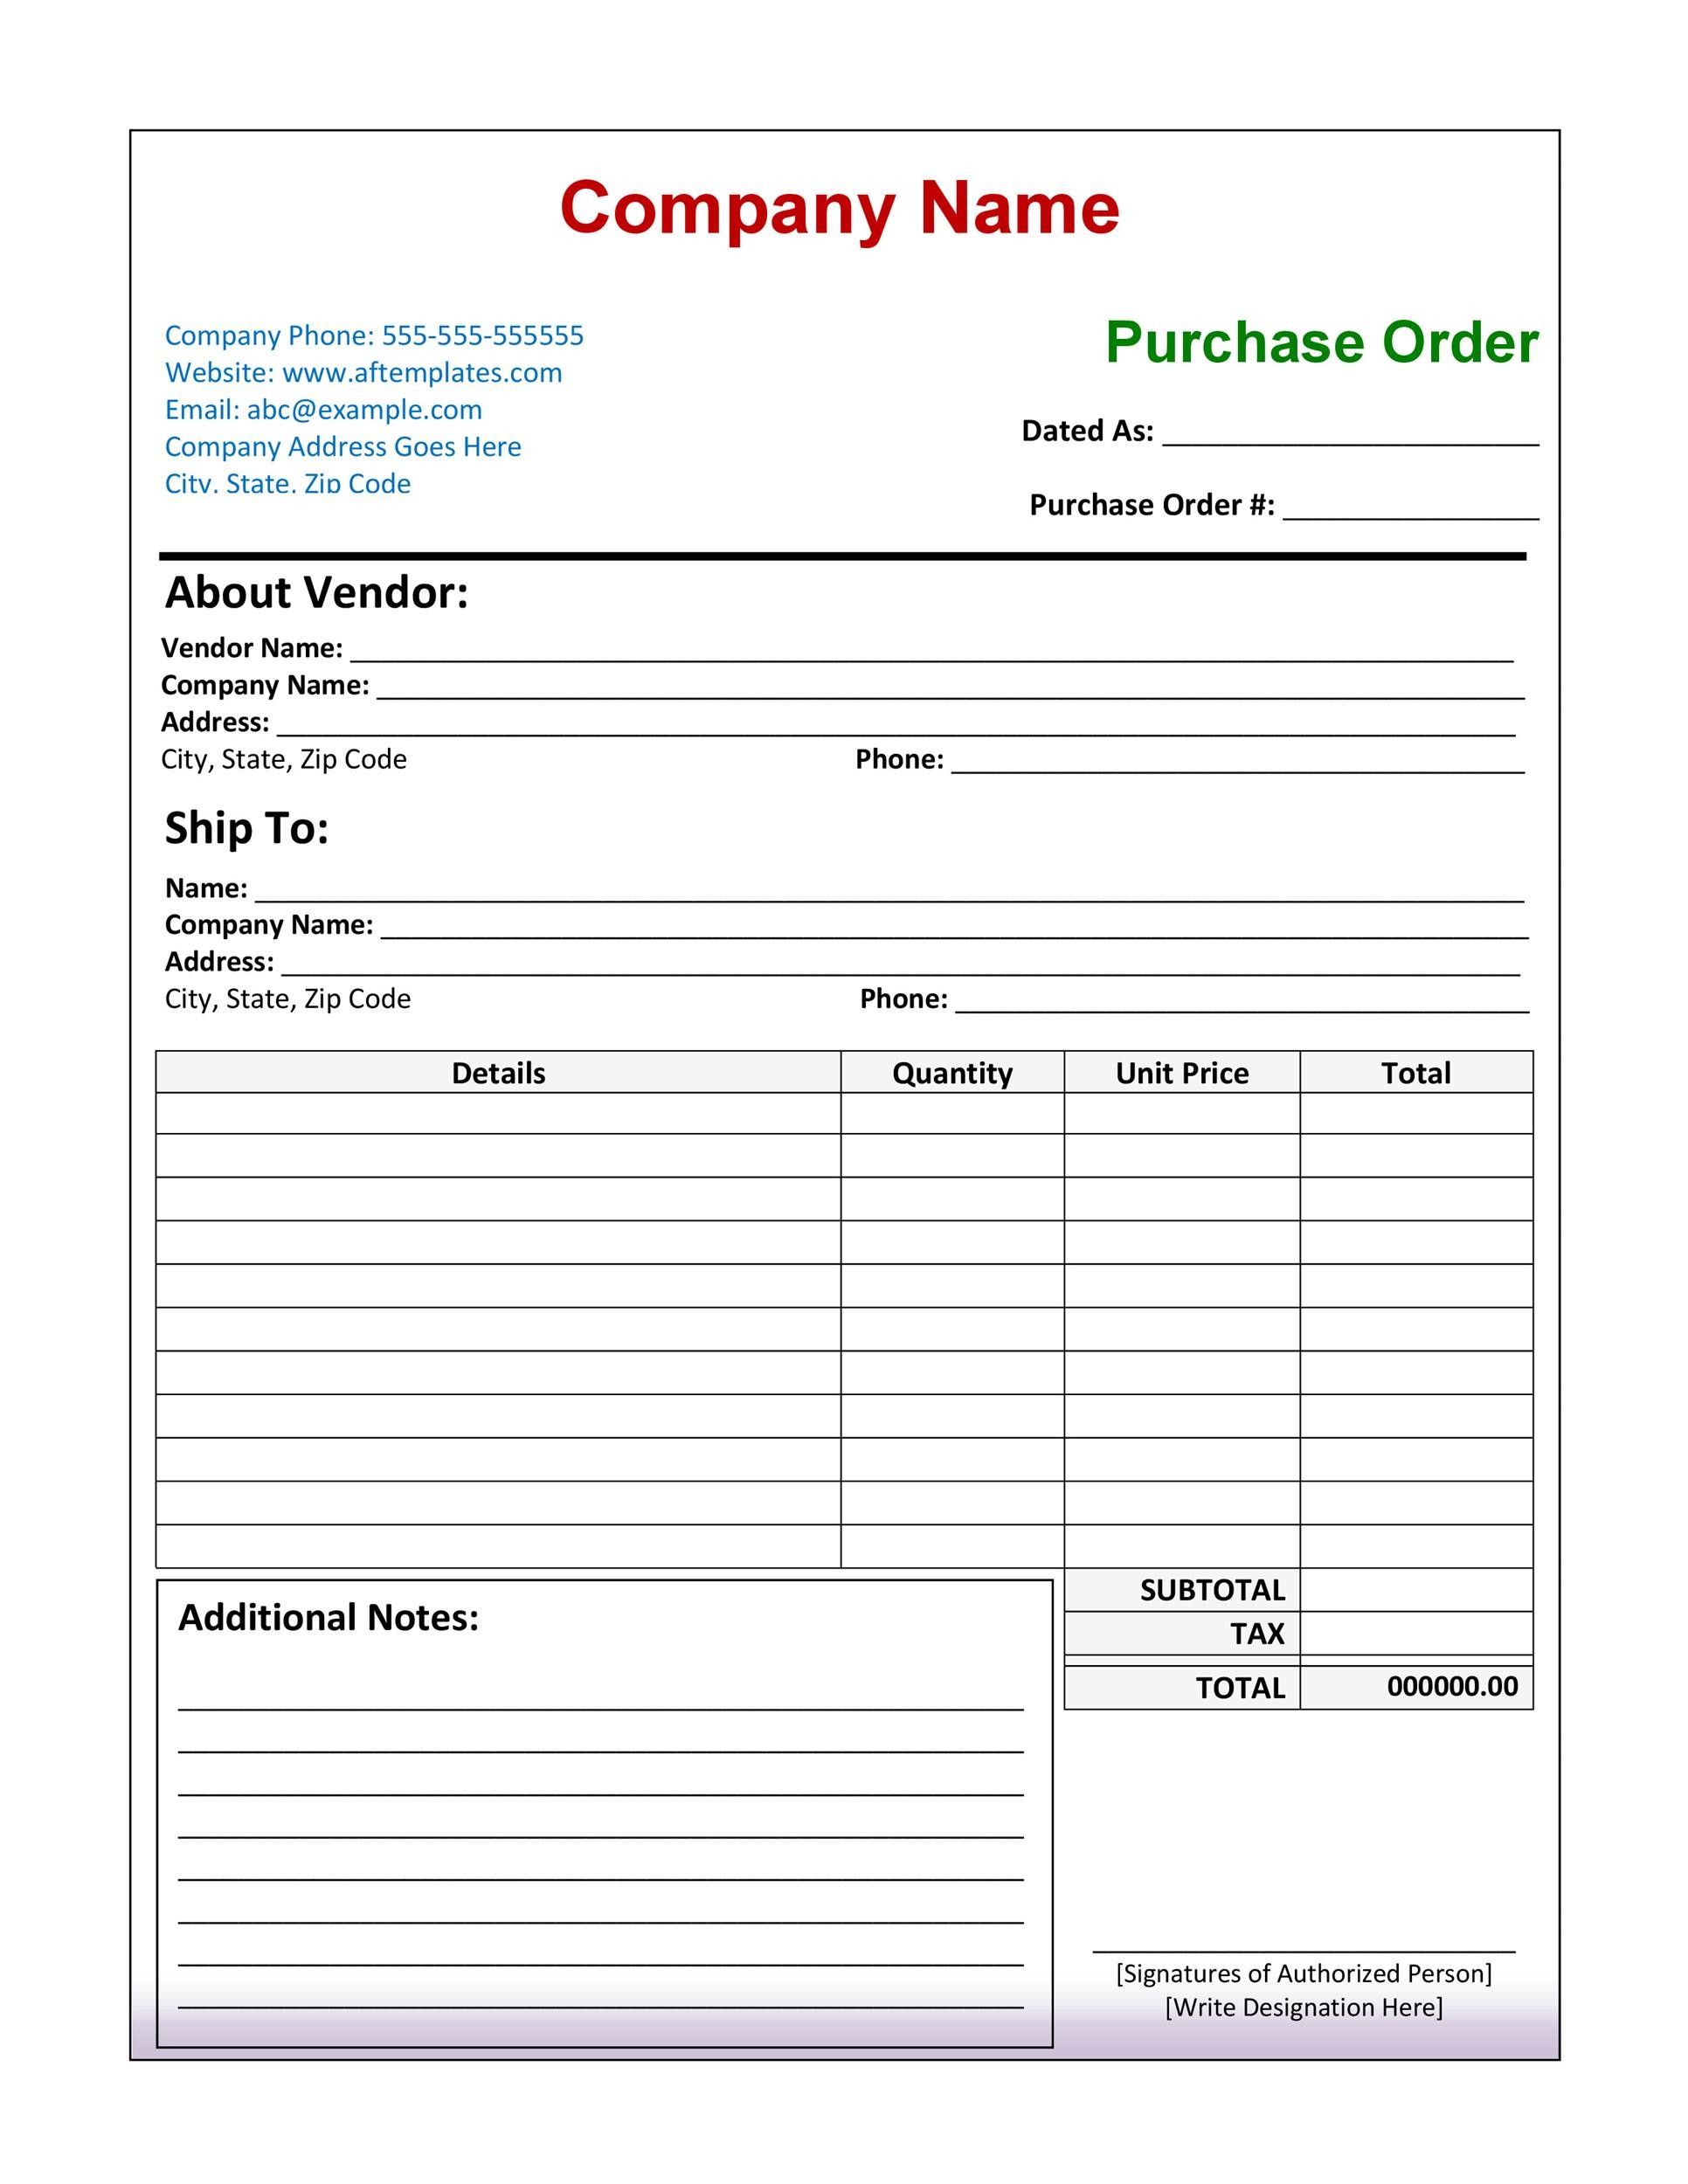 Purchase Order Request Form Template